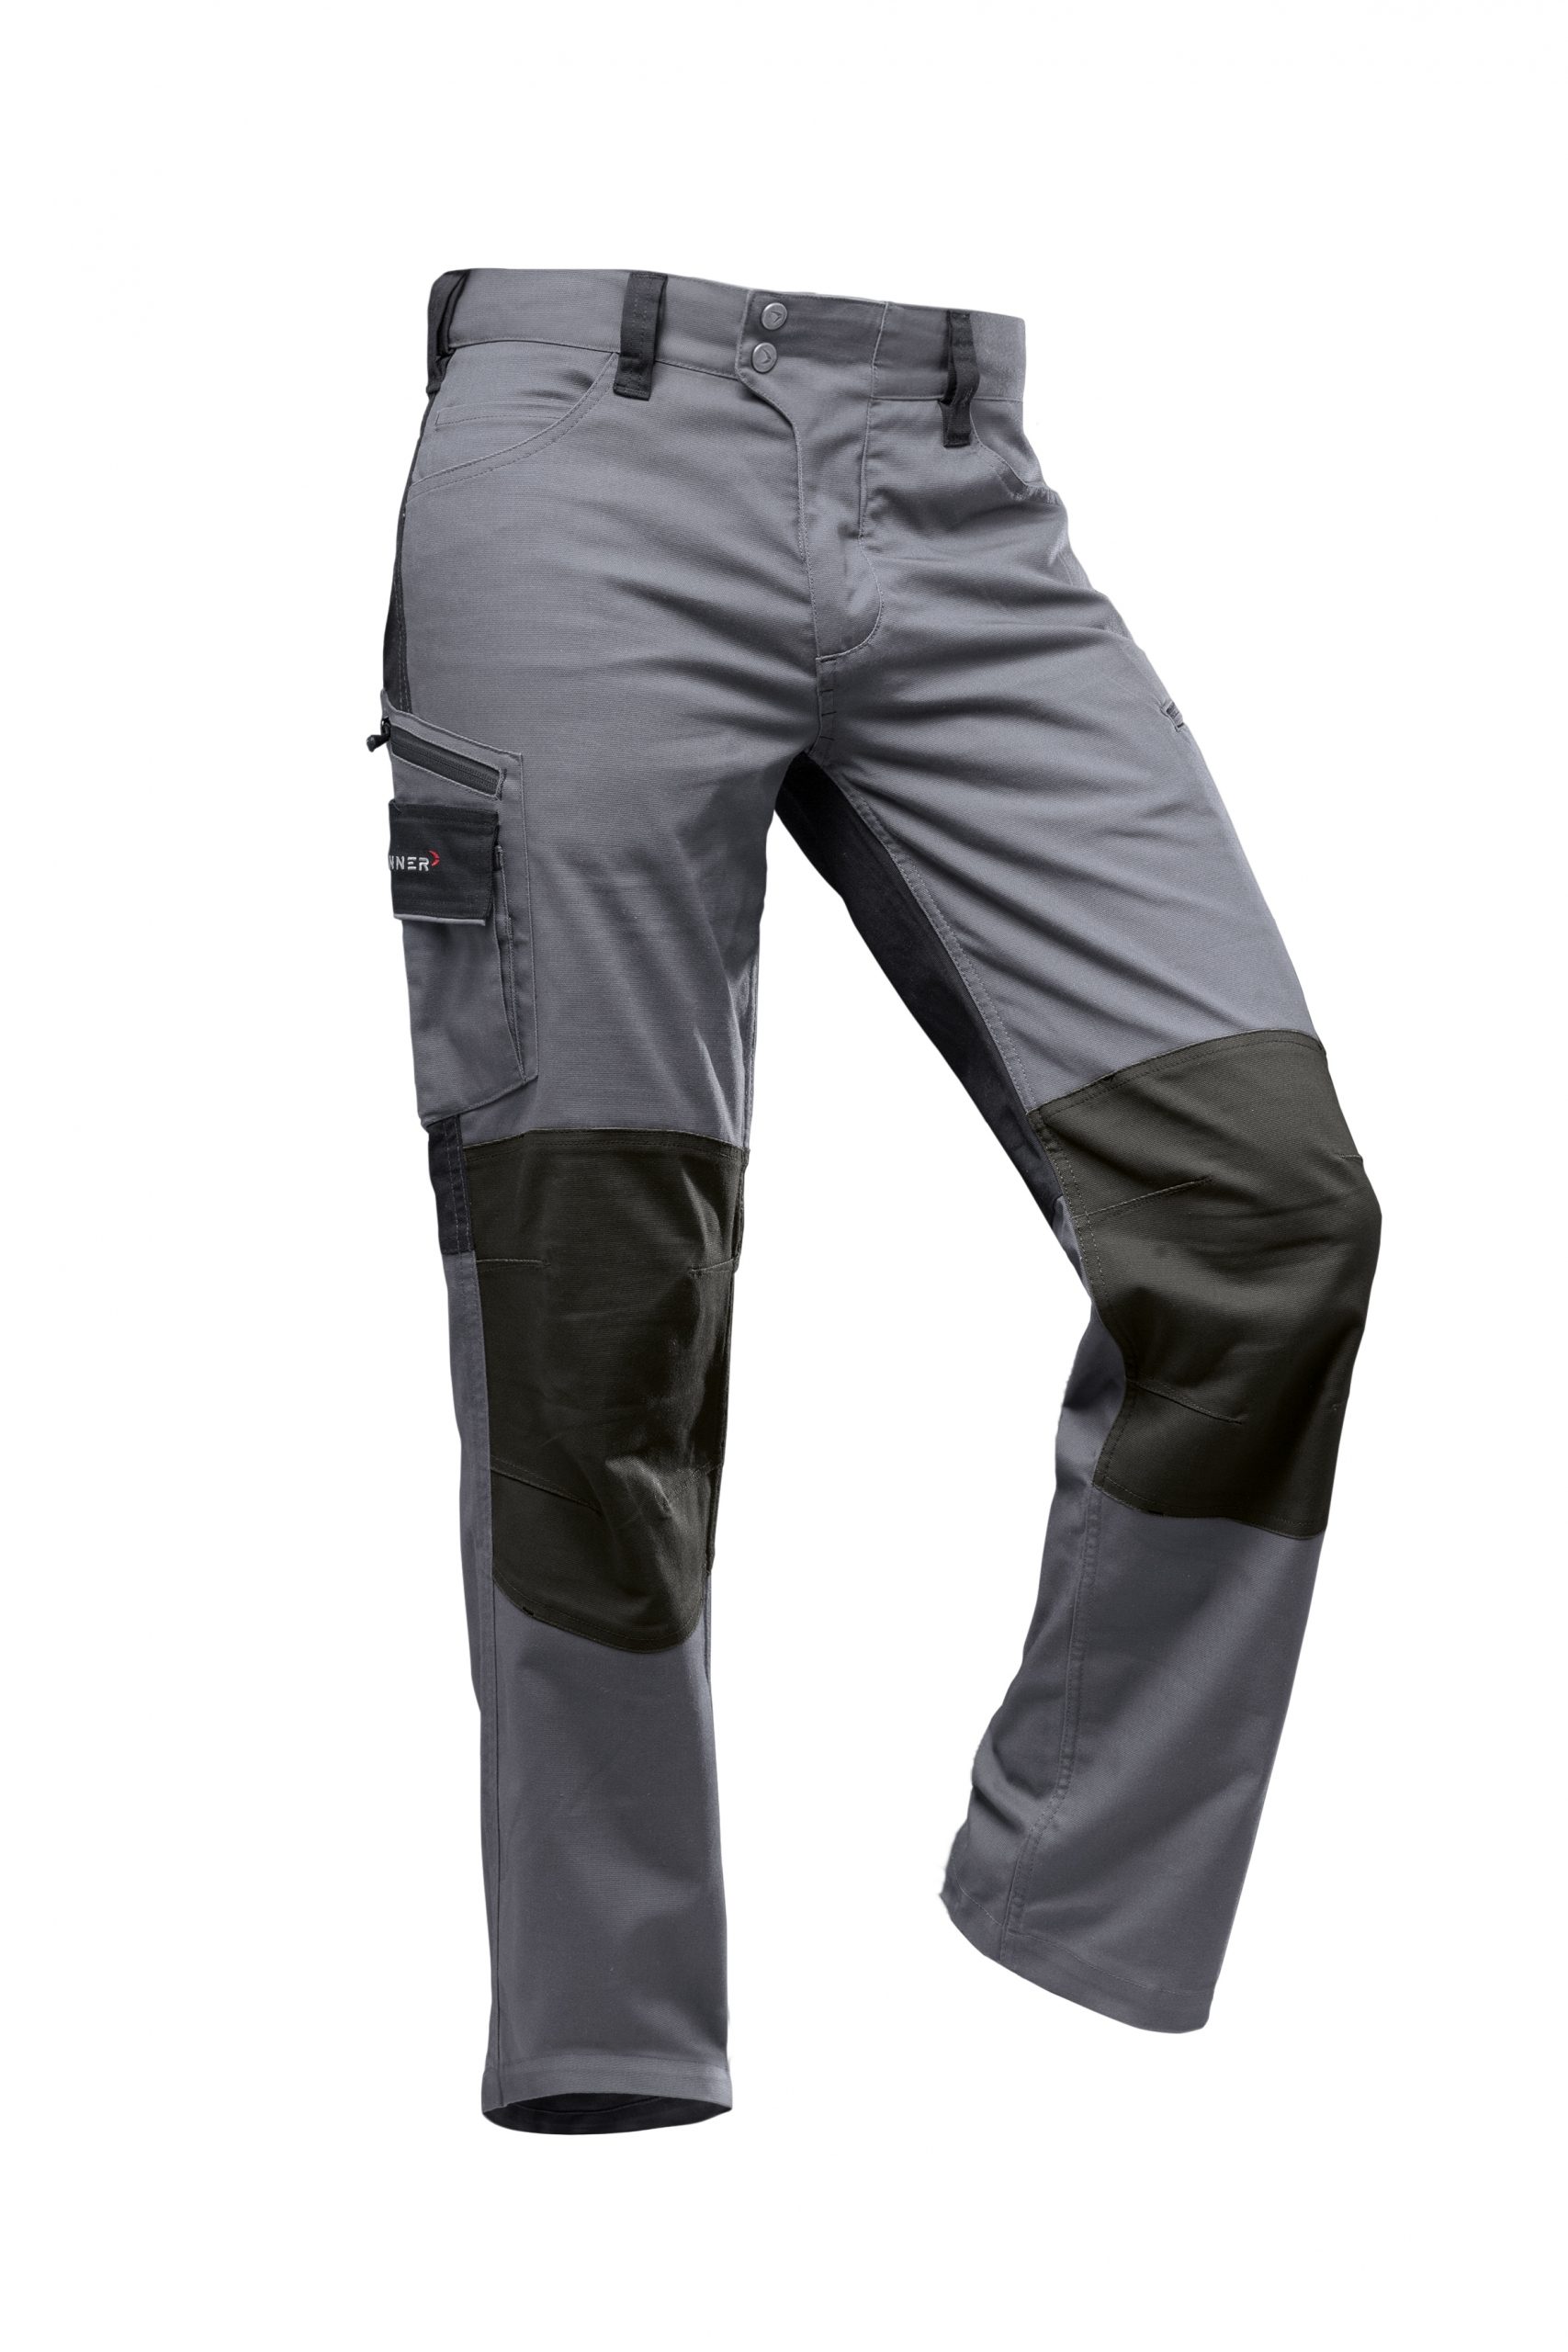 New Pfanner Arborist Chainsaw Trousers Coming Soon! - General chat -  Arbtalk | The Social Network For Arborists